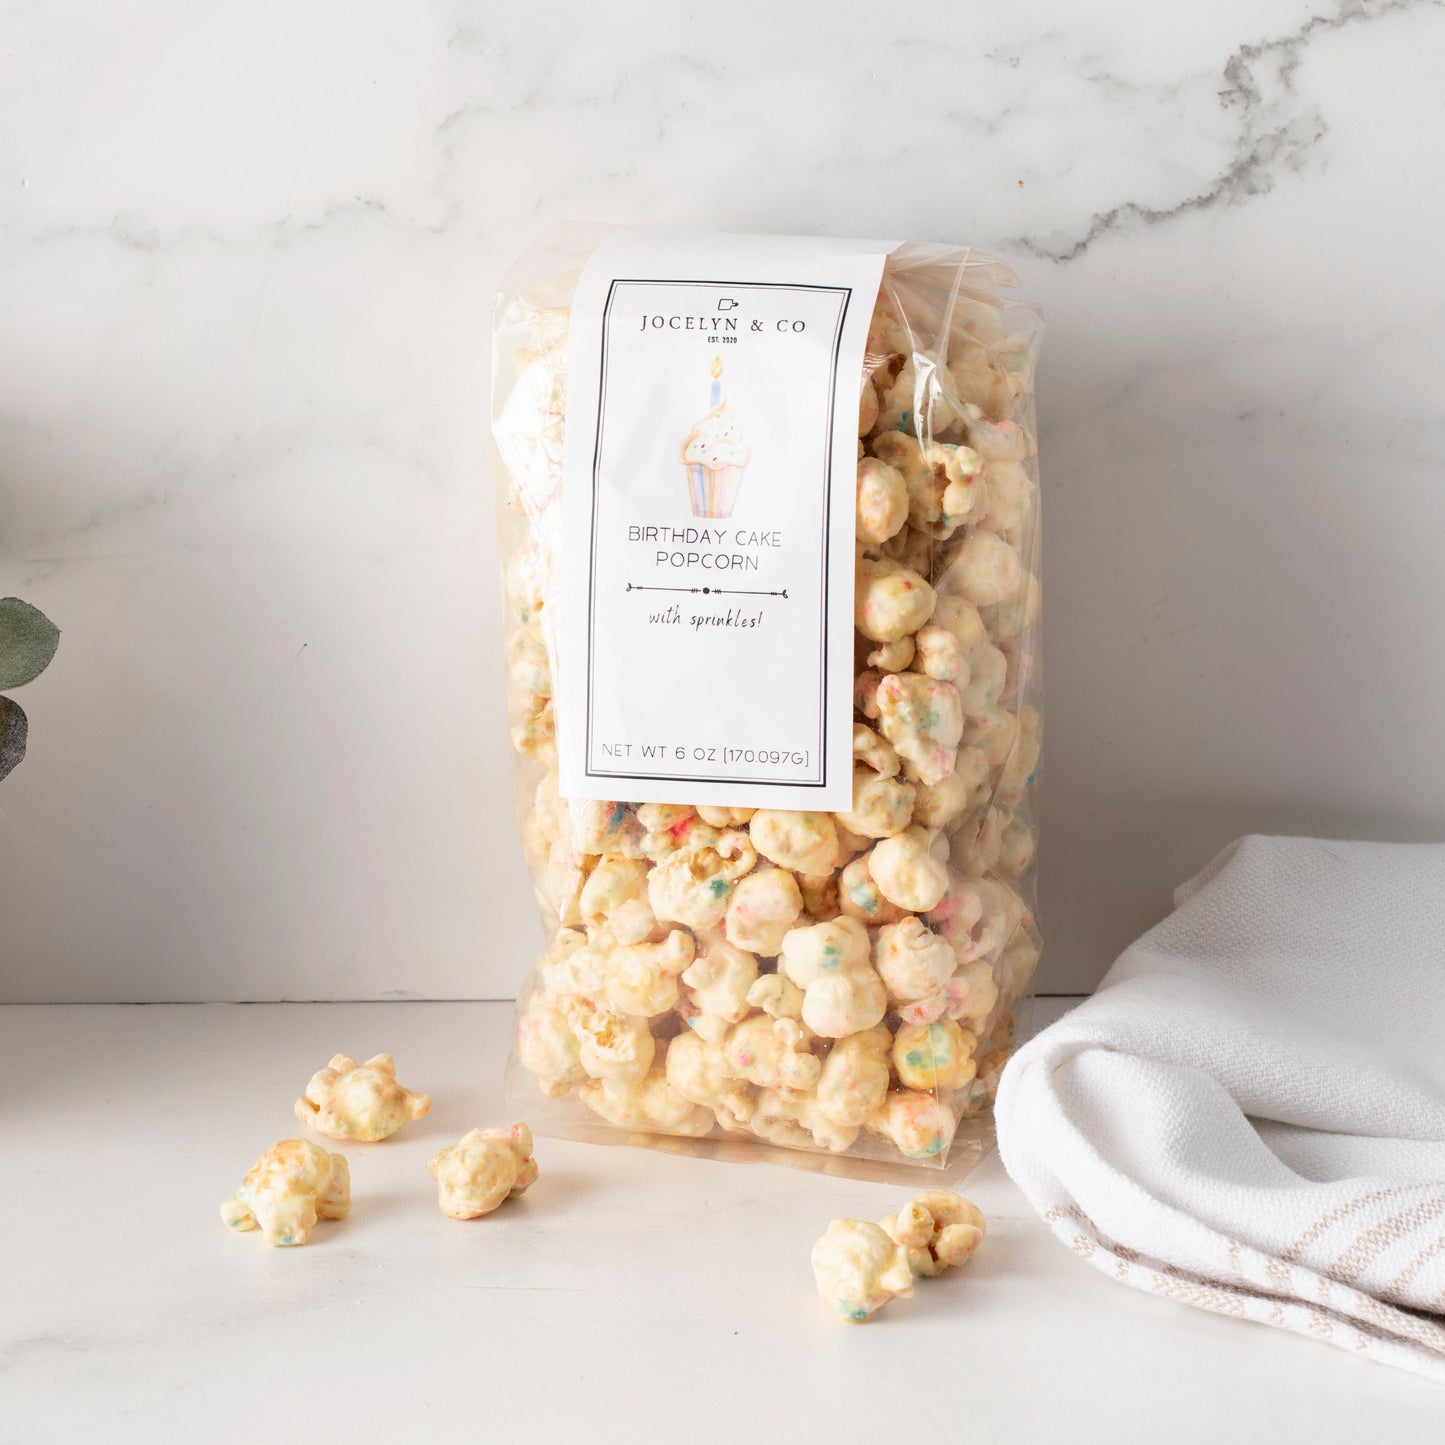 Private Label Packaging Only for Birthday Cake Popcorn-250